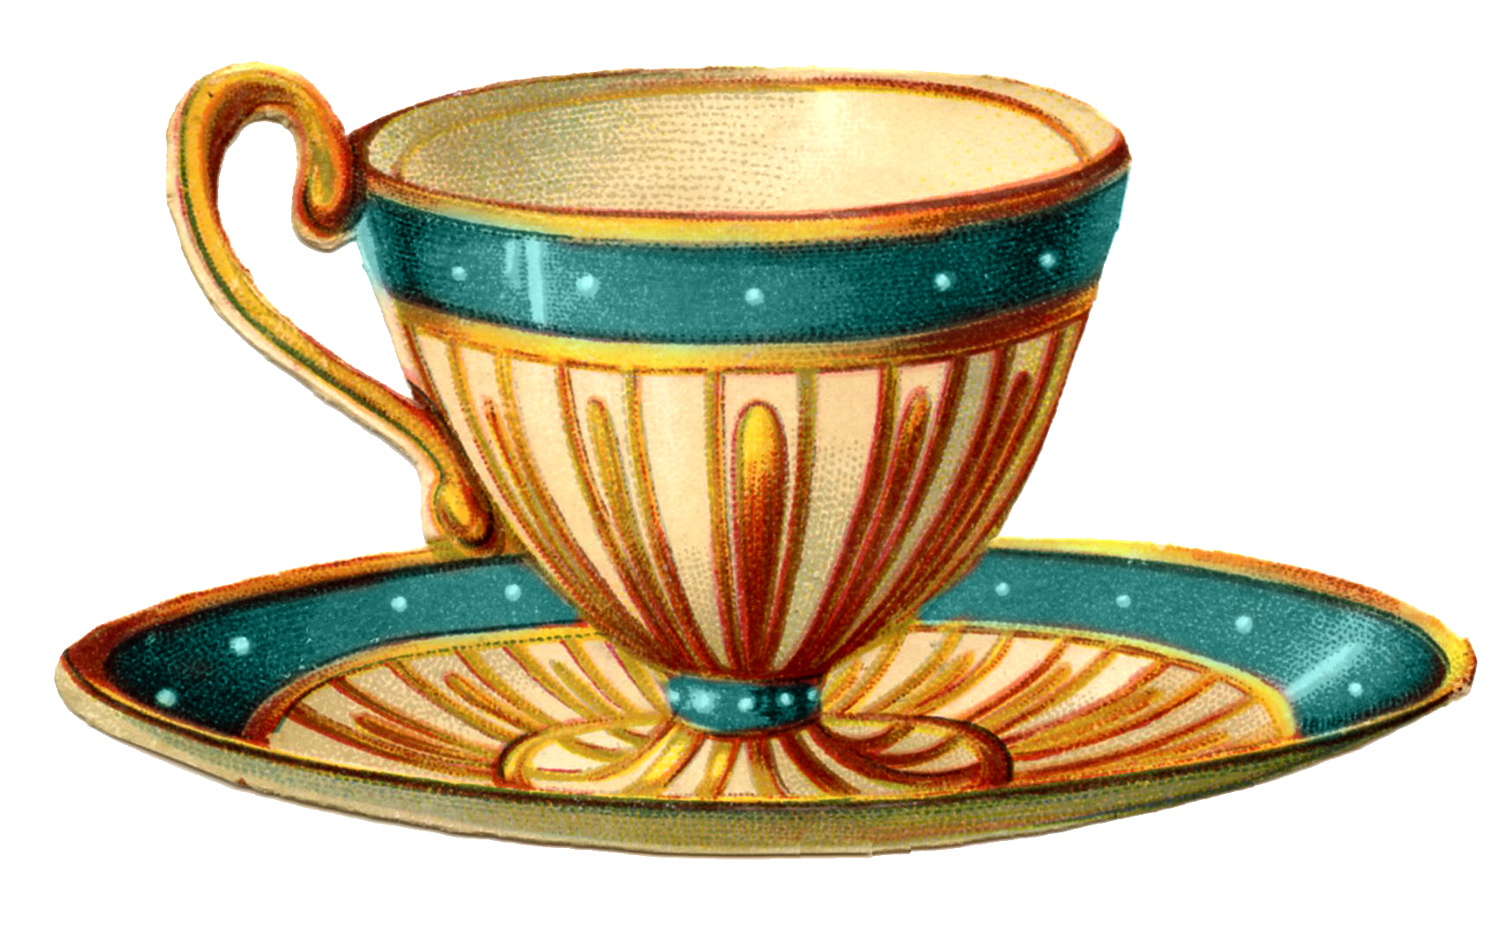 victorian teacup drawing